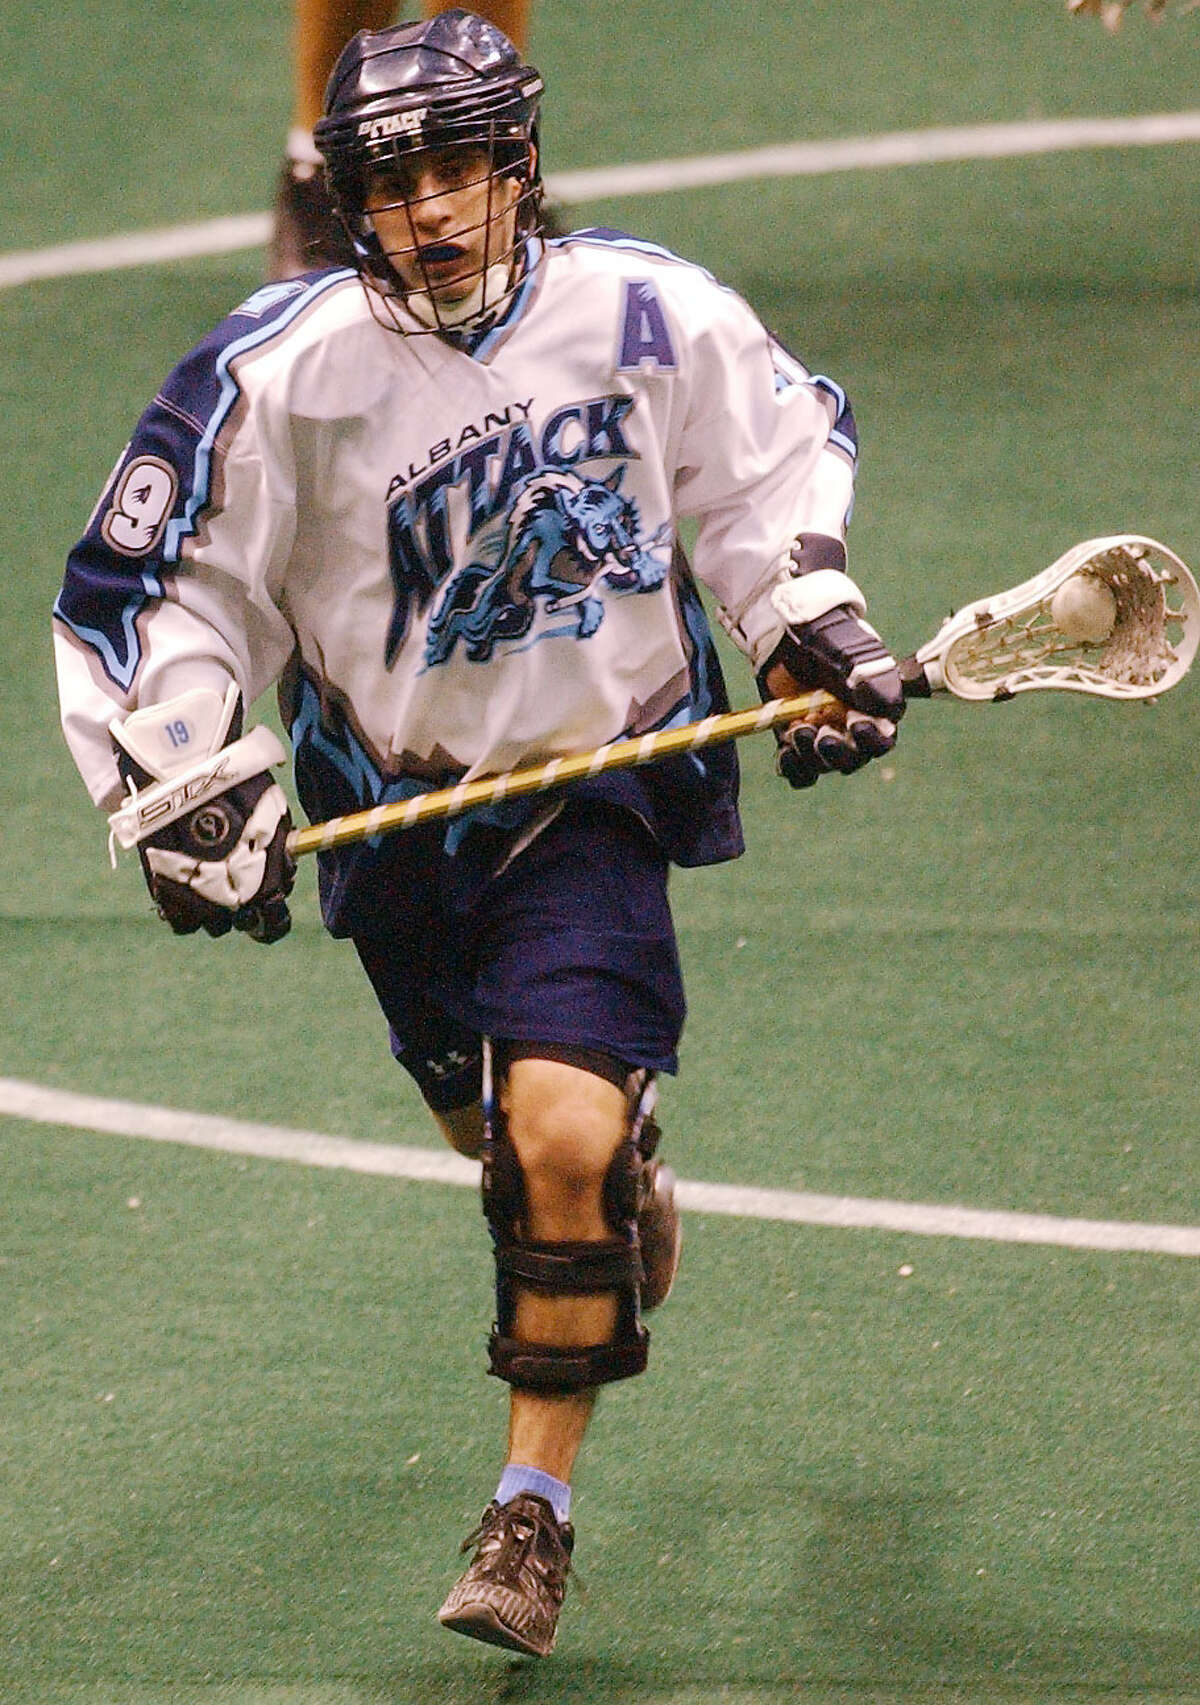 The old Albany Attack jersey, one of which was worn by Josh Sanderson (above) in 2002, is the prize given to the Albany FireWolves Player of the Game after a victory. The FireWolves use one that belonged to former Attack defenseman Darryl Gibson, now a FireWolves assistant.